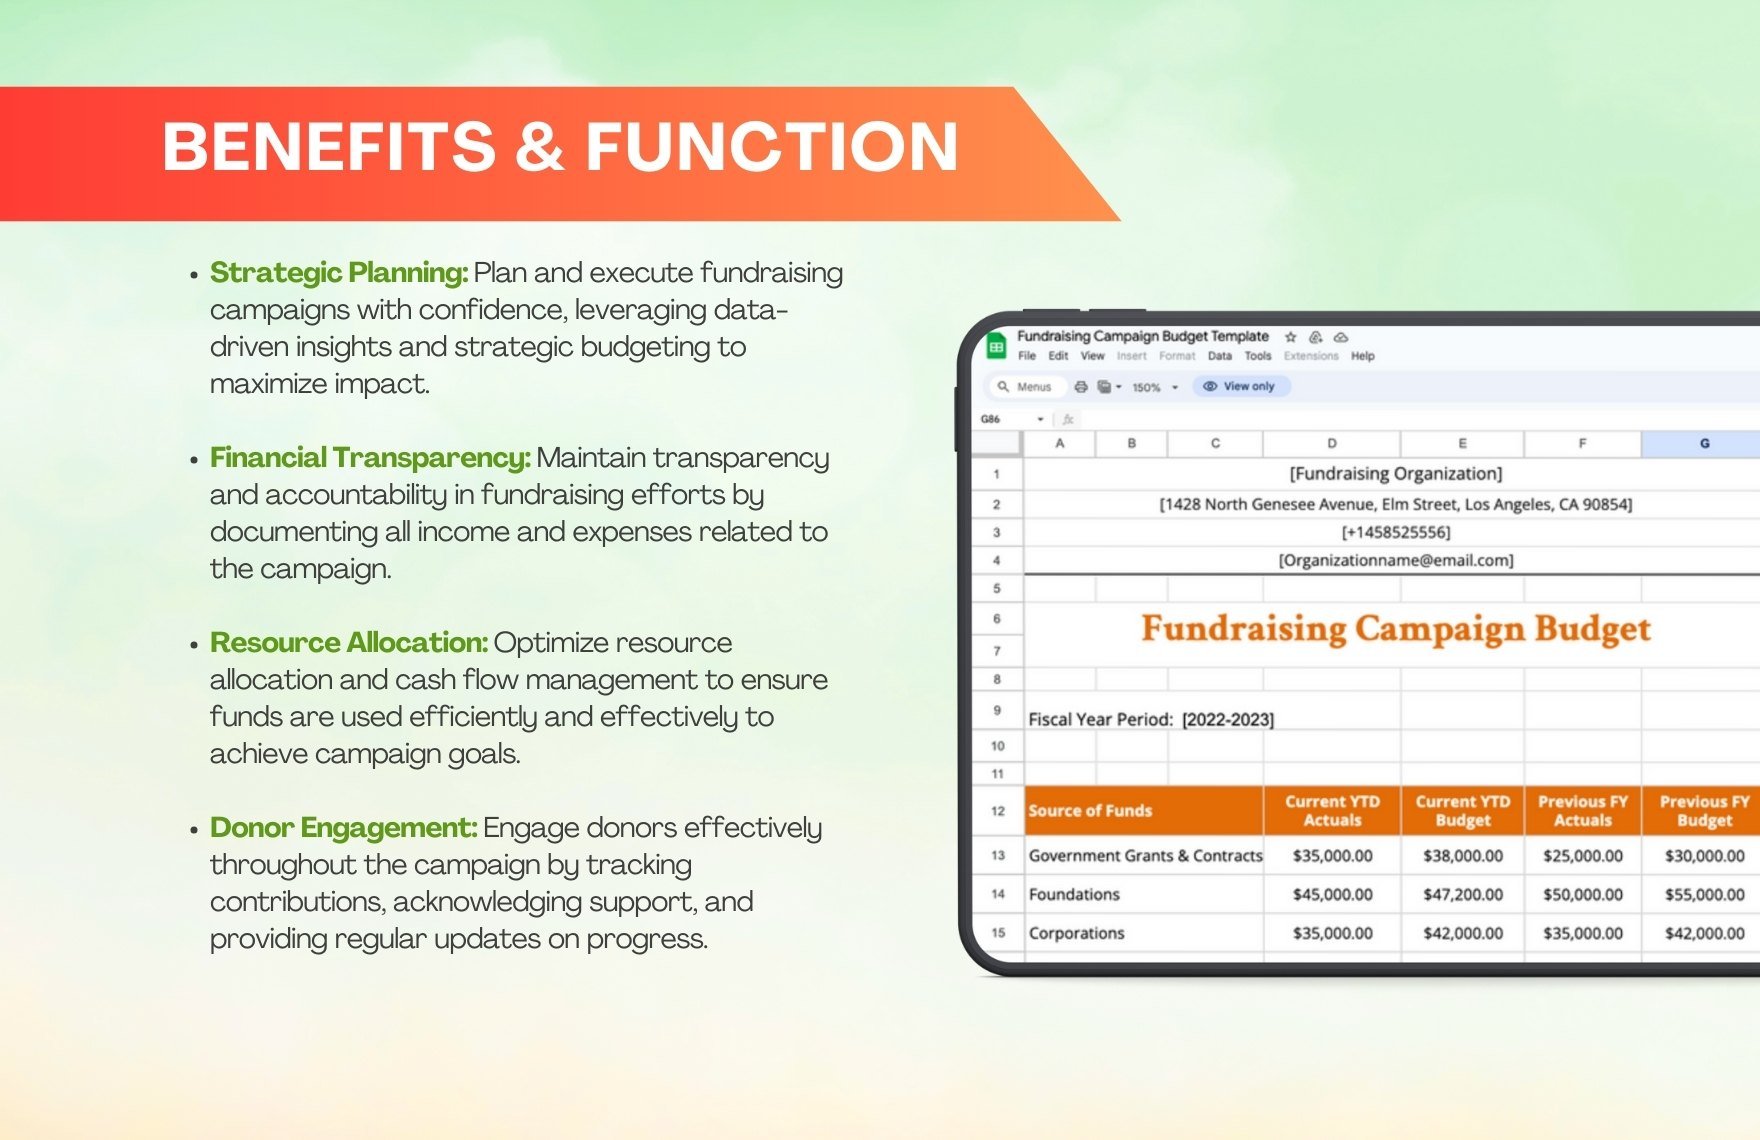 Fundraising Campaign Budget Template